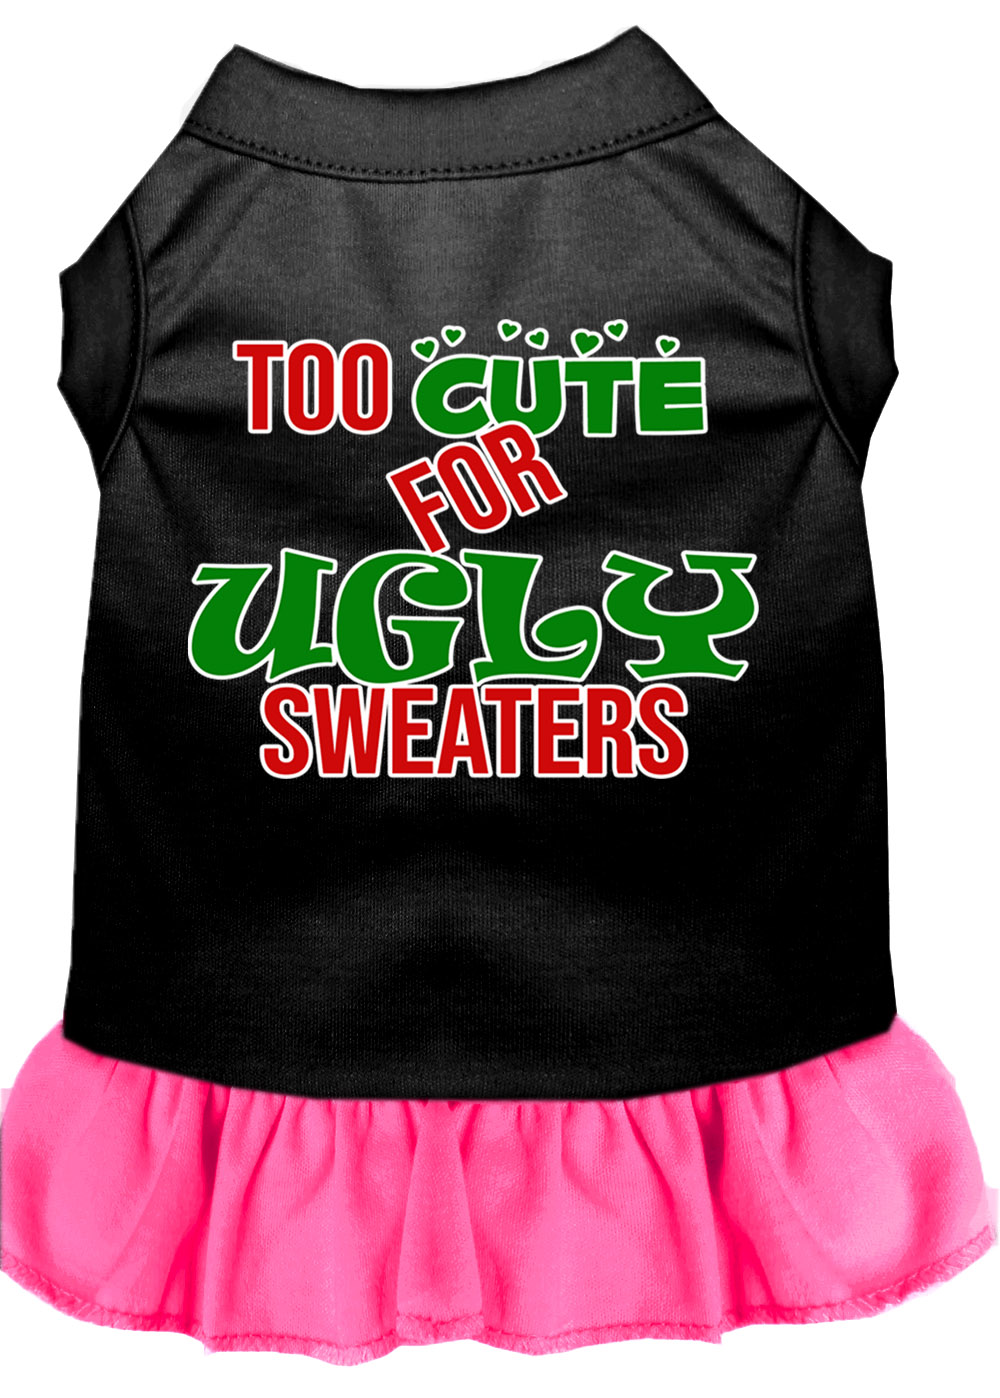 Too Cute for Ugly Sweaters Screen Print Dog Dress Black with Bright Pink 4X